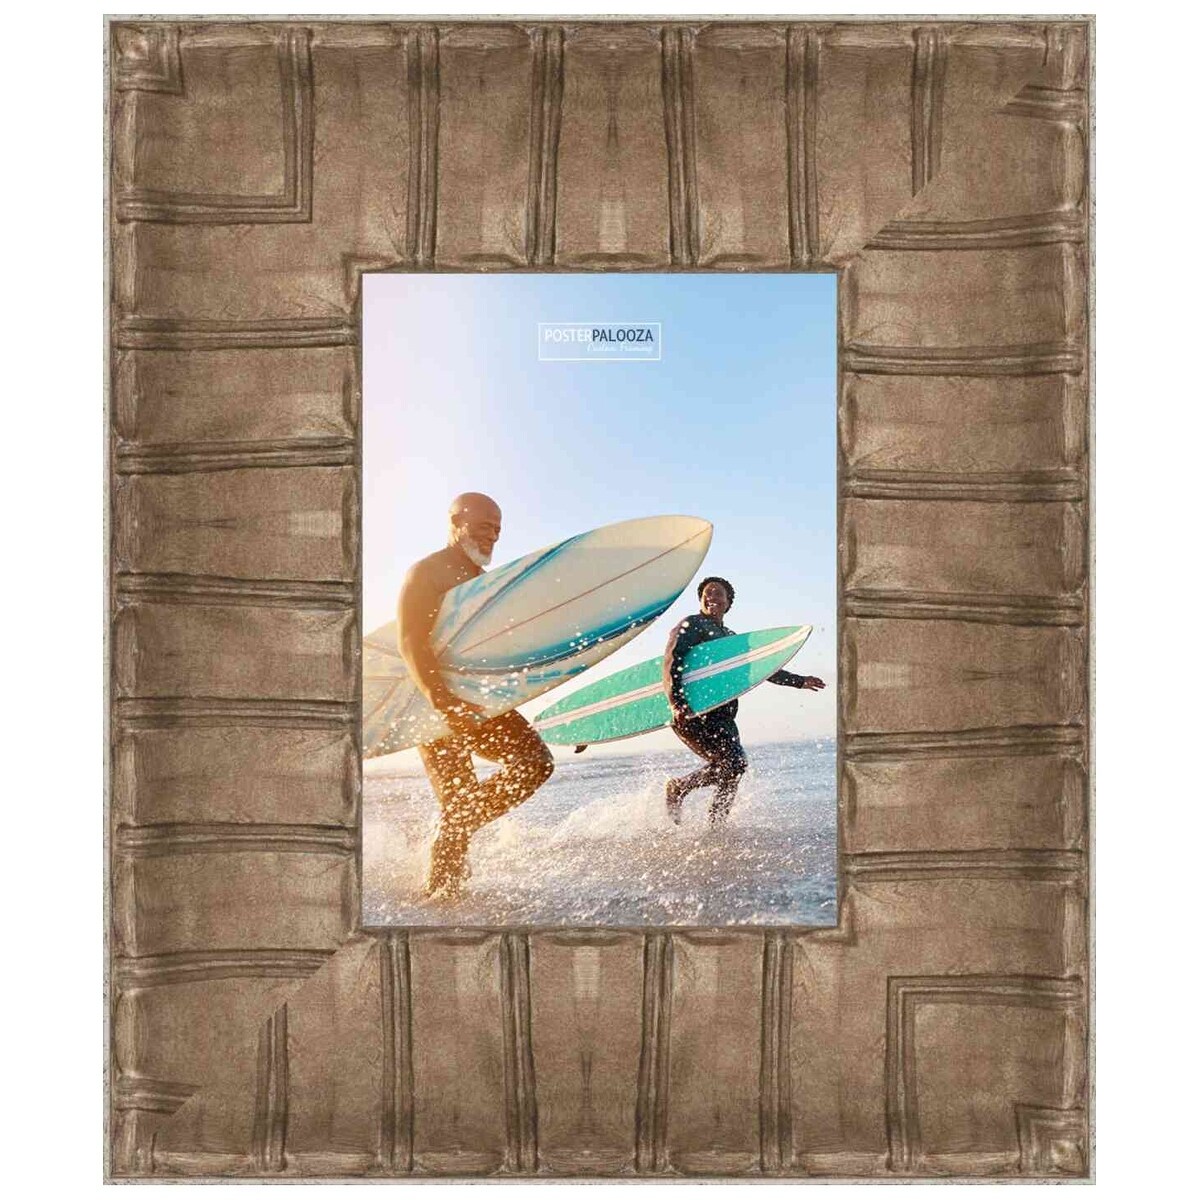 11x14 Traditional Silver Complete Wood Picture Frame with UV Acrylic, Foam Board Backing, & Hardware